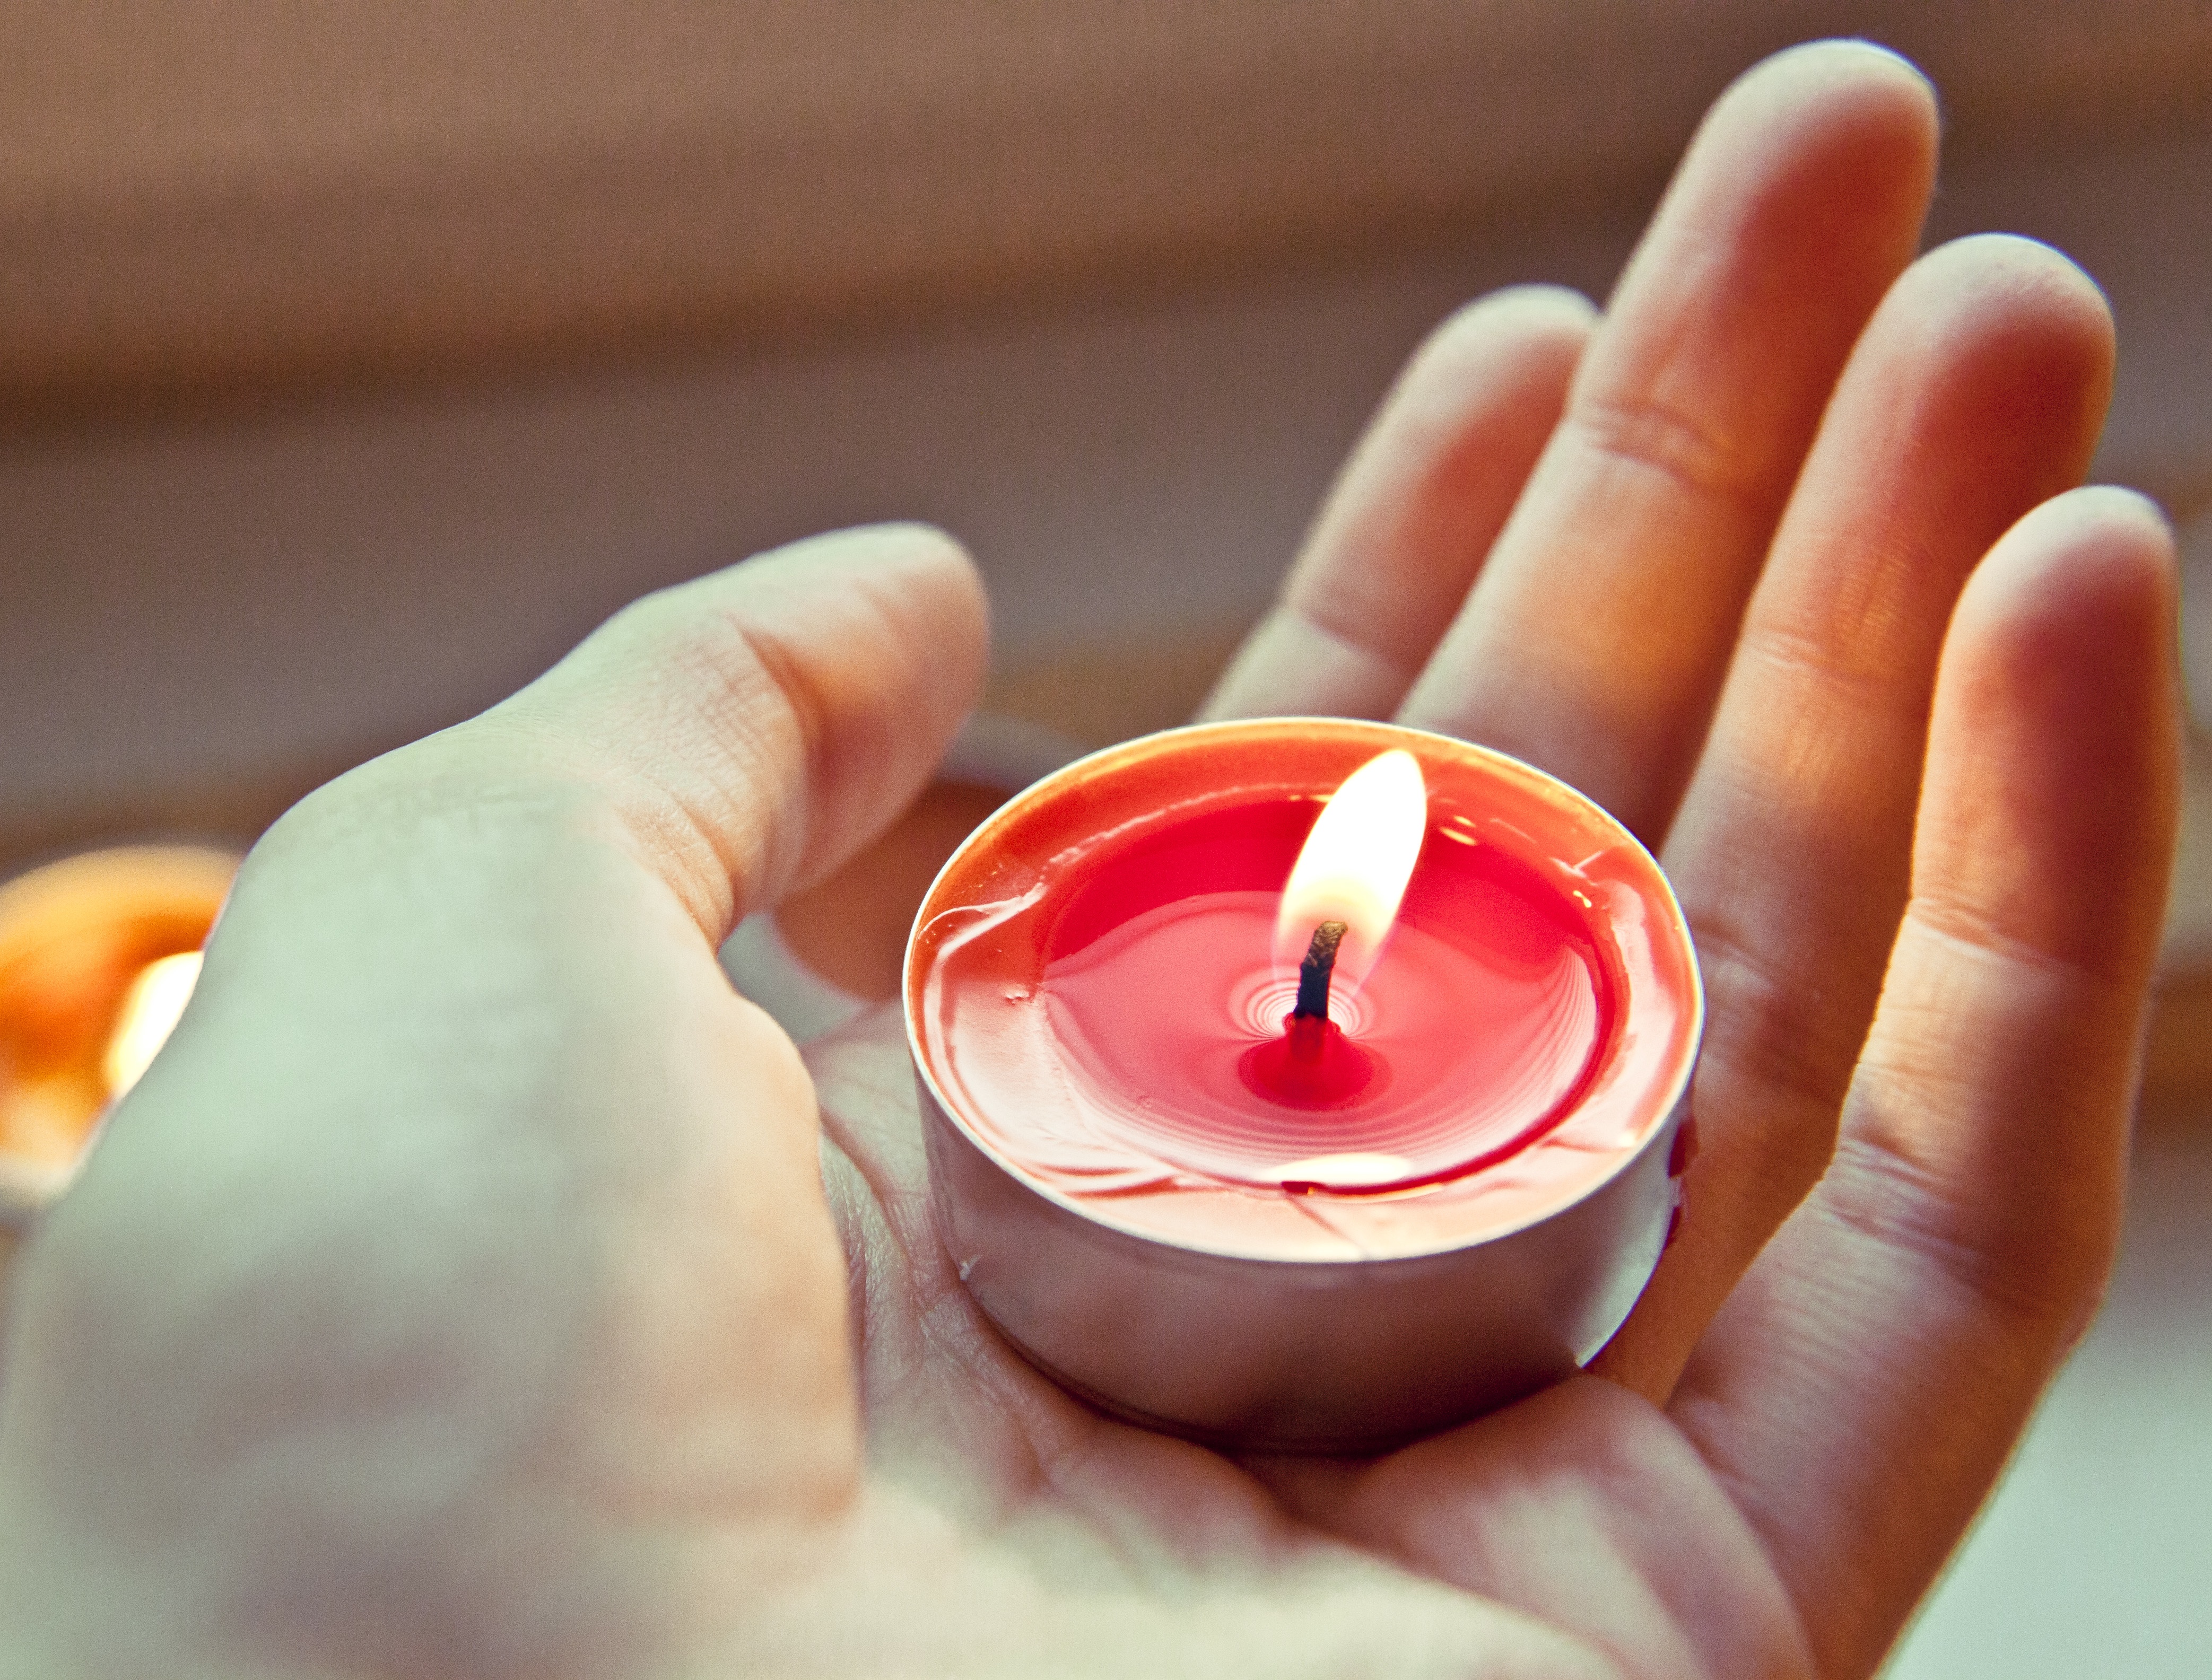 Holding a candle photo